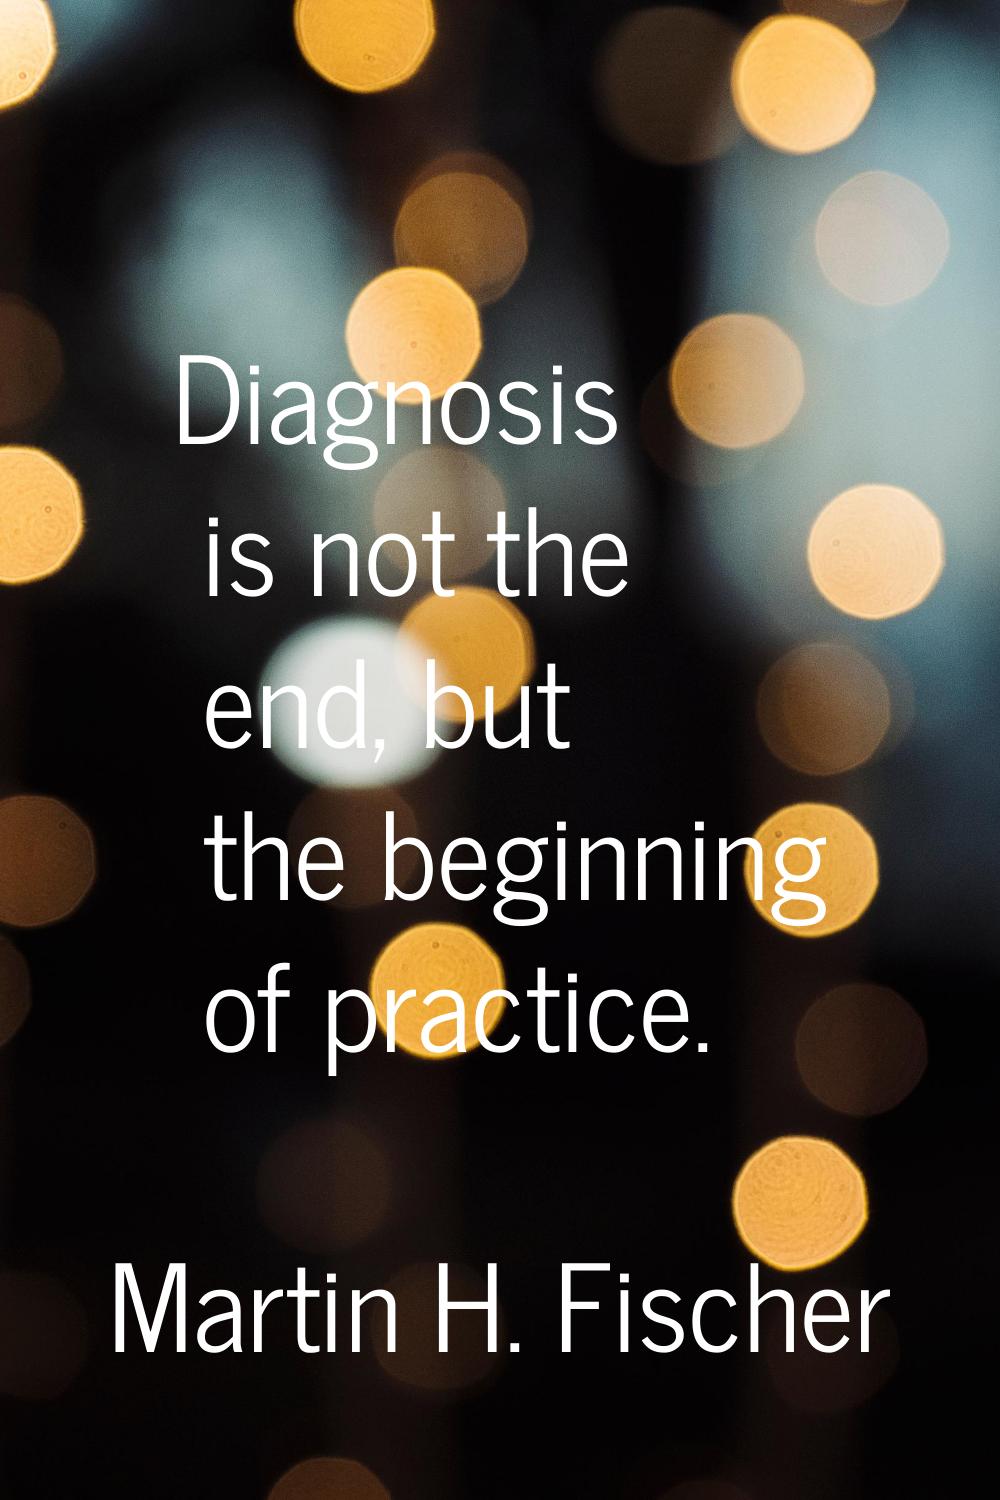 Diagnosis is not the end, but the beginning of practice.